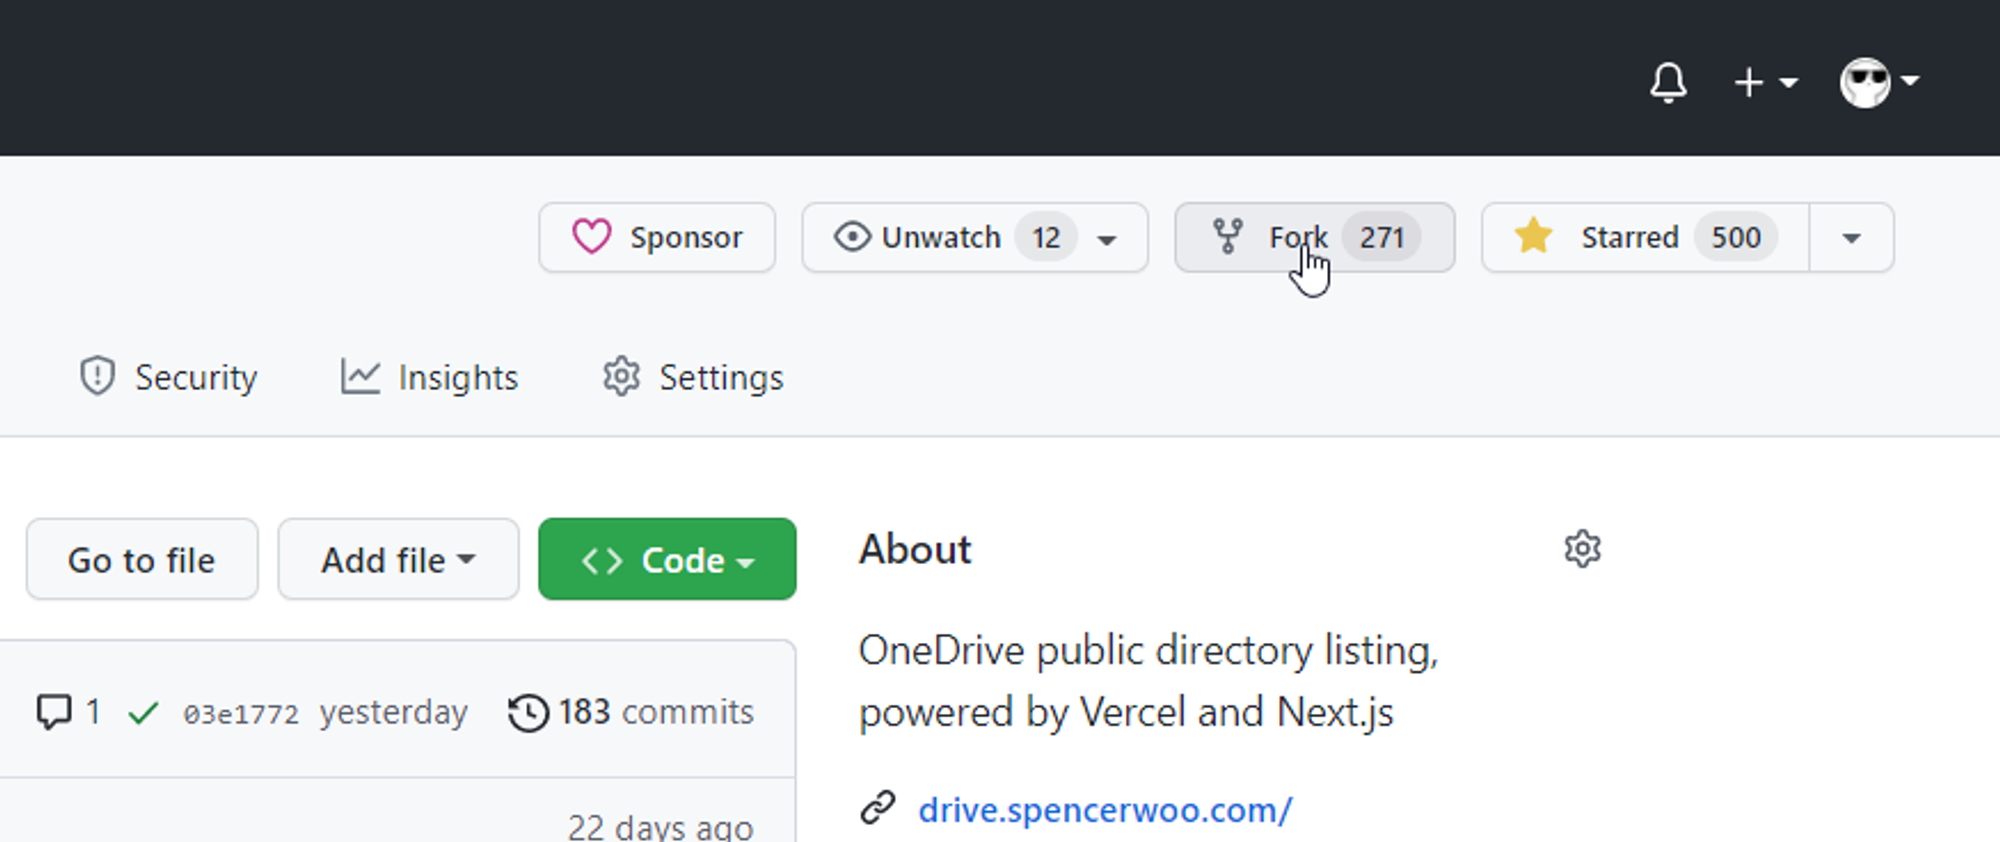 Fork the repo to your own GitHub account